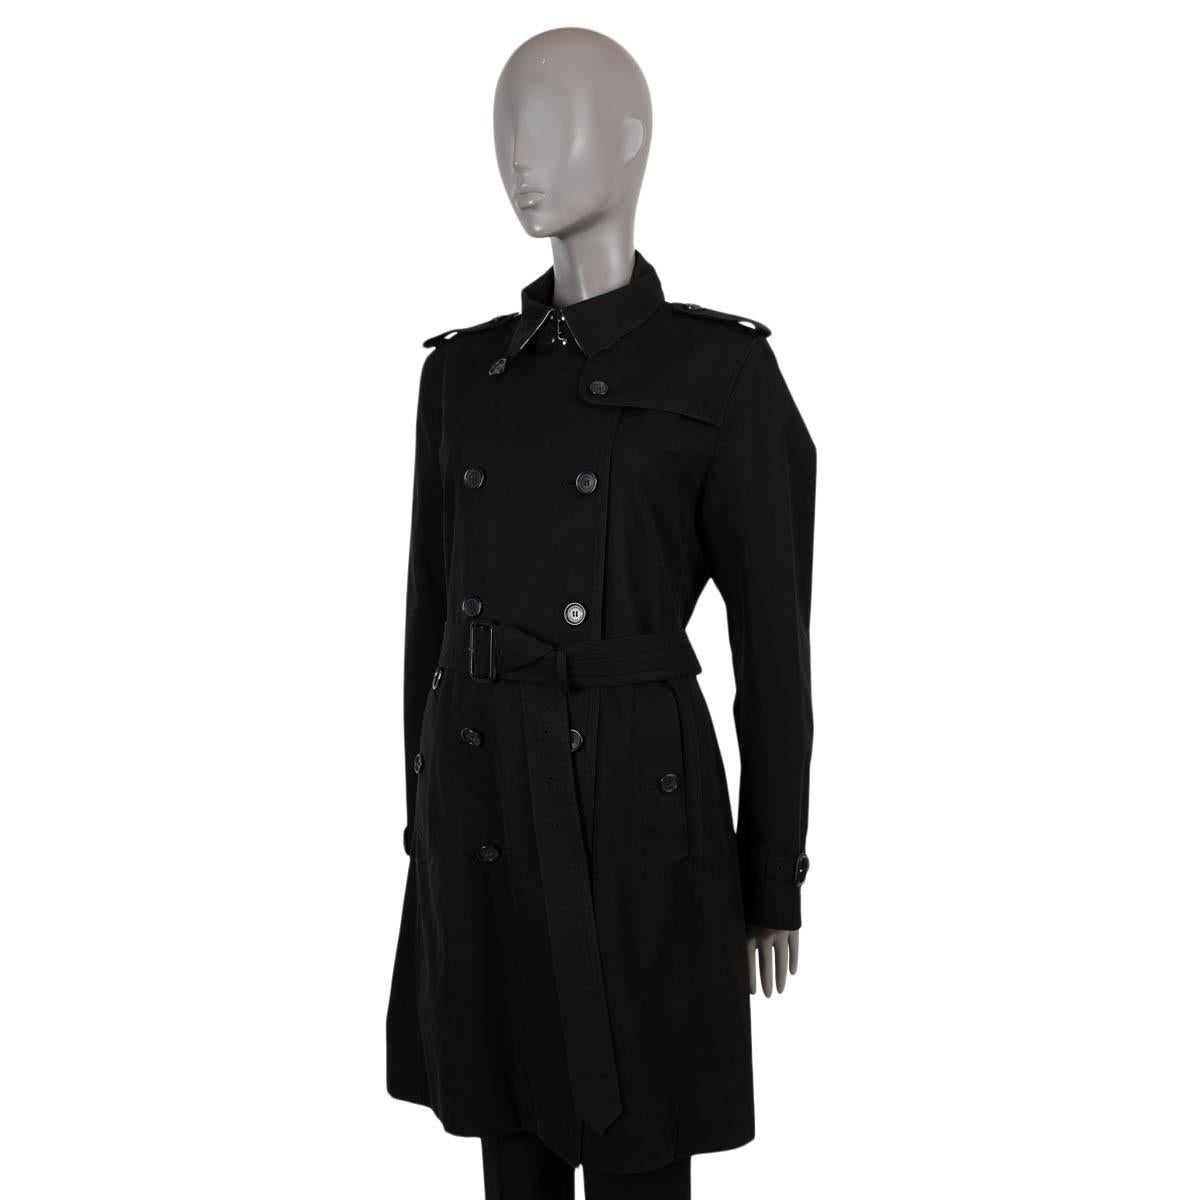 100% authentic Burberry Kensington double-breasted long trench coat in black cotton gabardine (100%). The design has all the hallmarks of the original including military-inspired epaulettes, a storm flap and, of course, the iconic beige checked